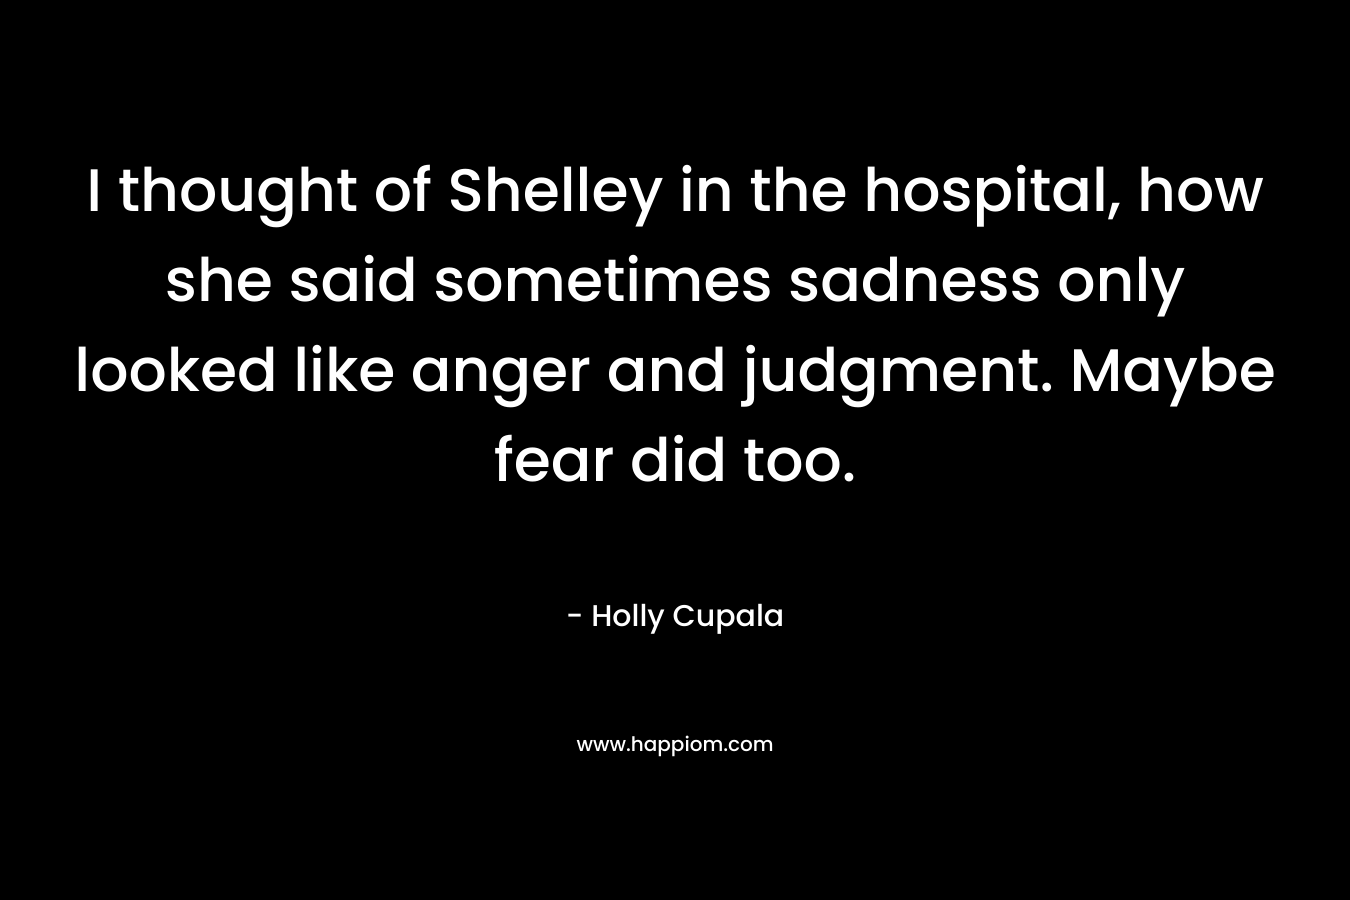 I thought of Shelley in the hospital, how she said sometimes sadness only looked like anger and judgment. Maybe fear did too.